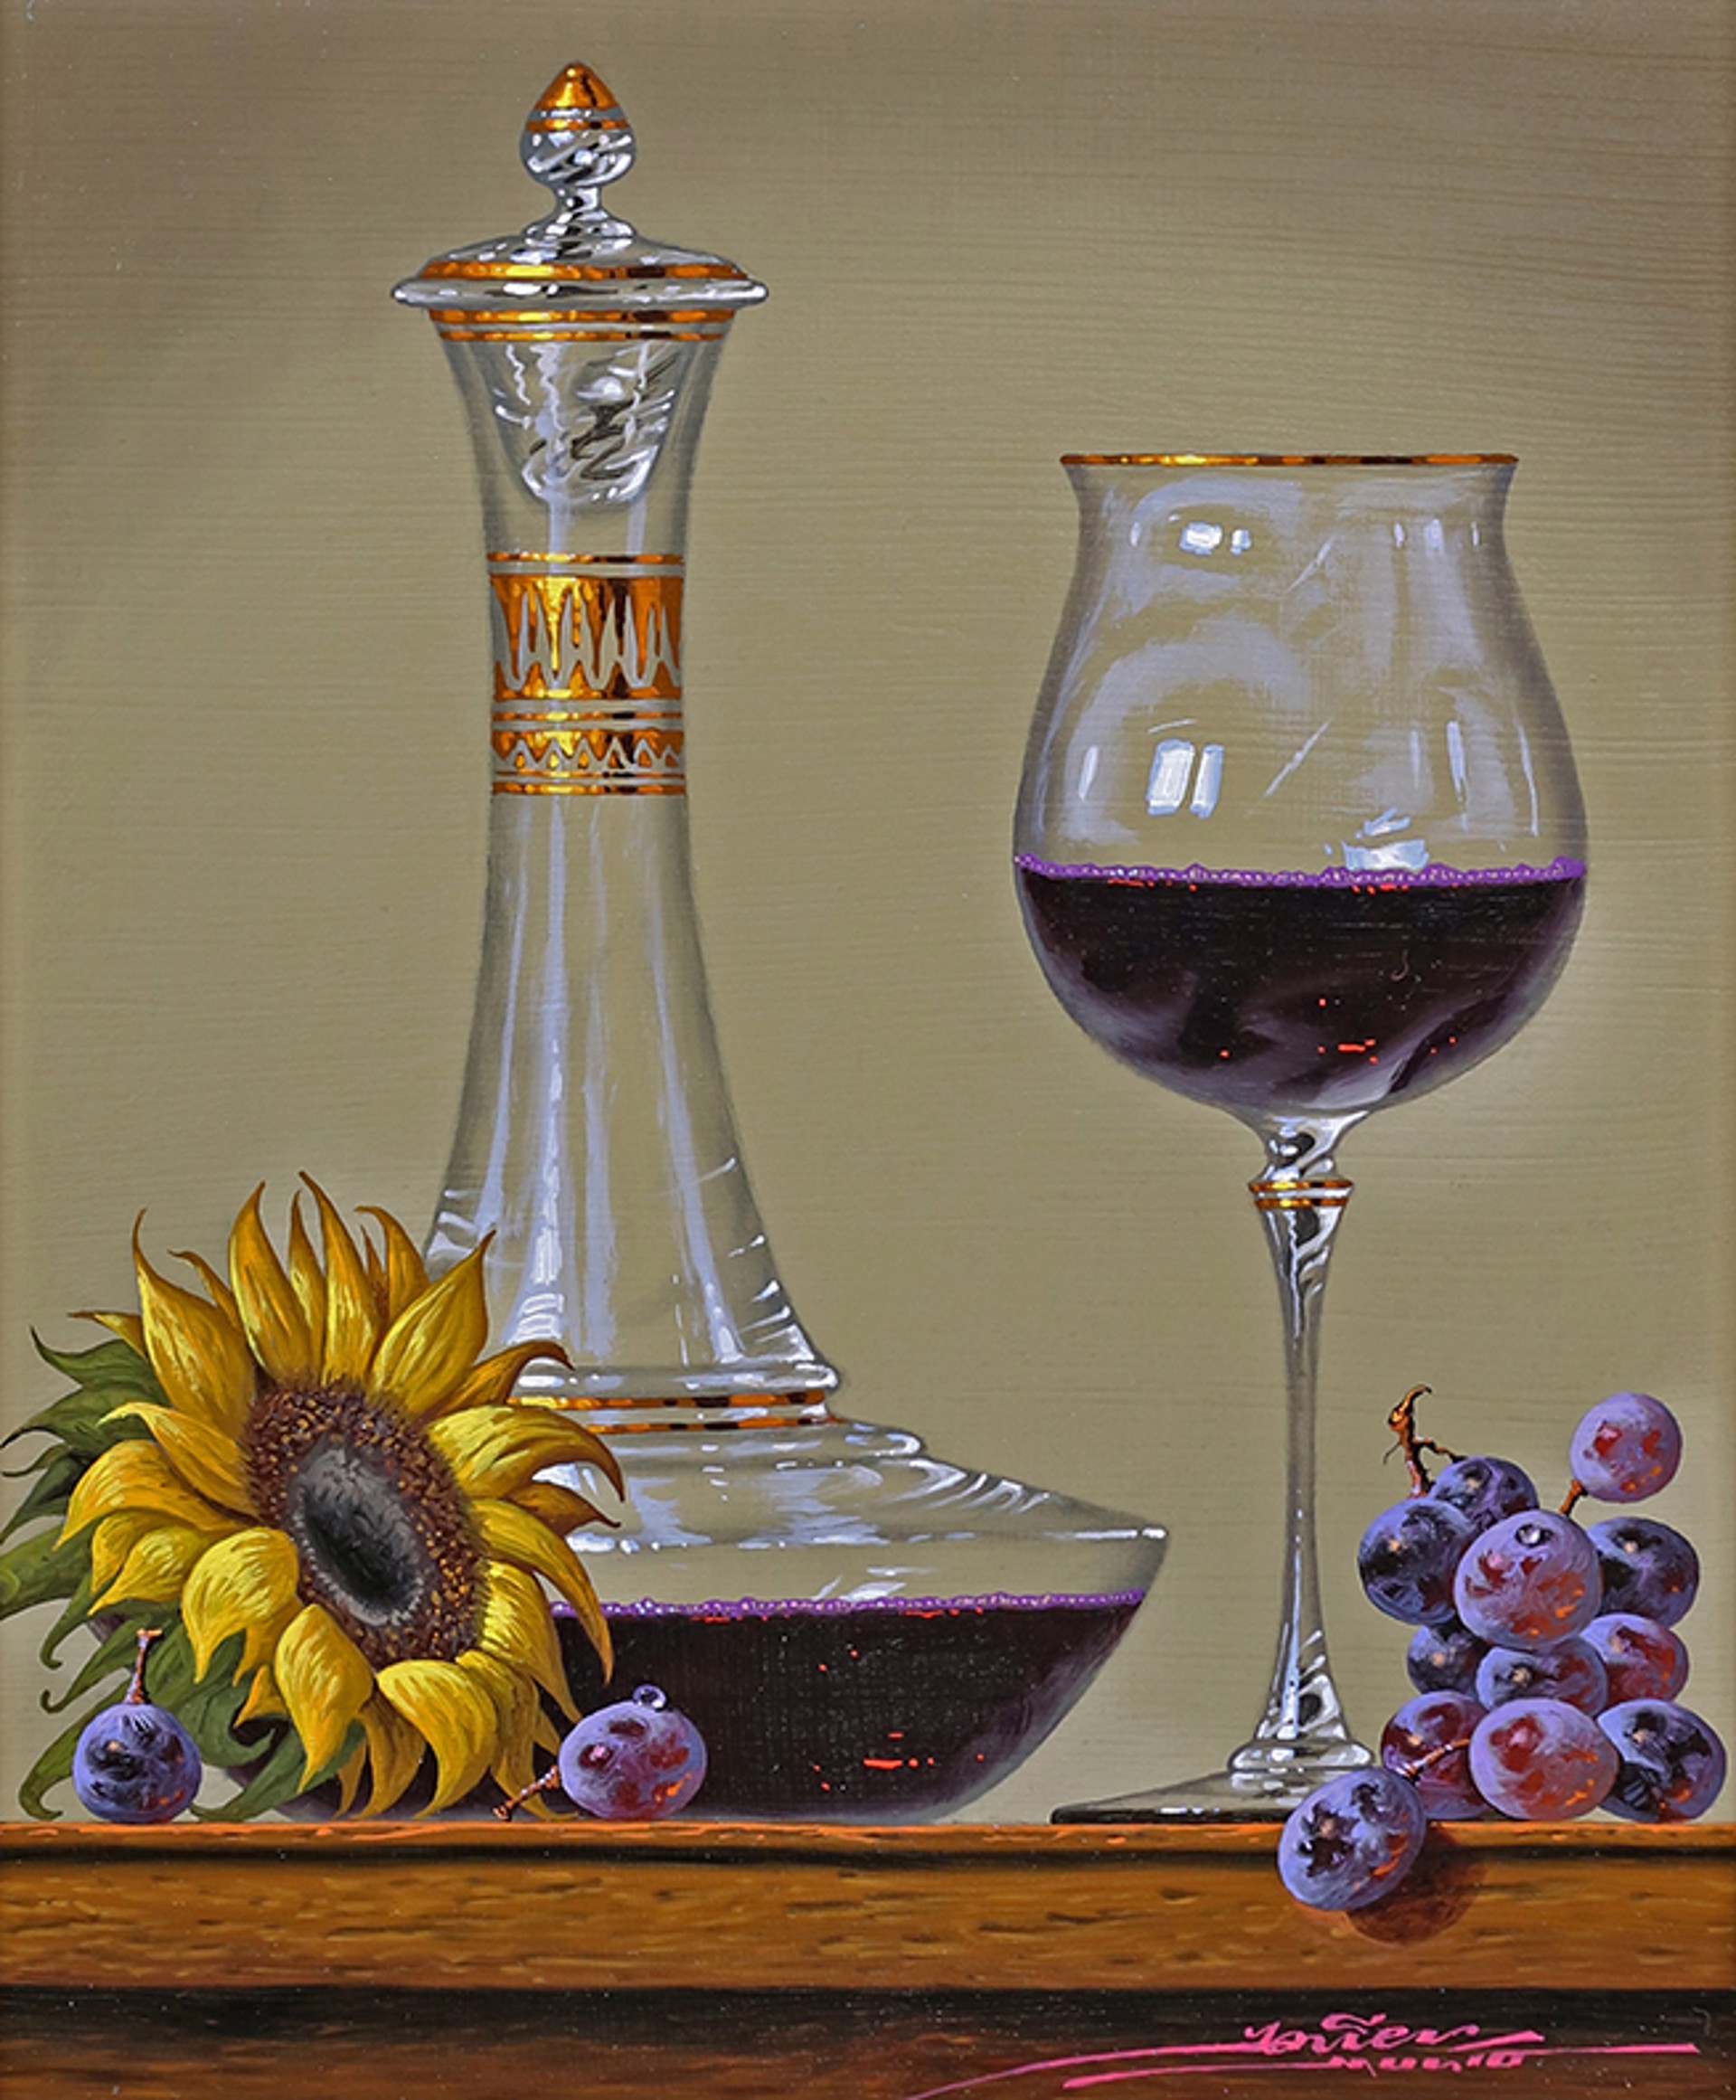 Let's have another Glass by Javier Mulio